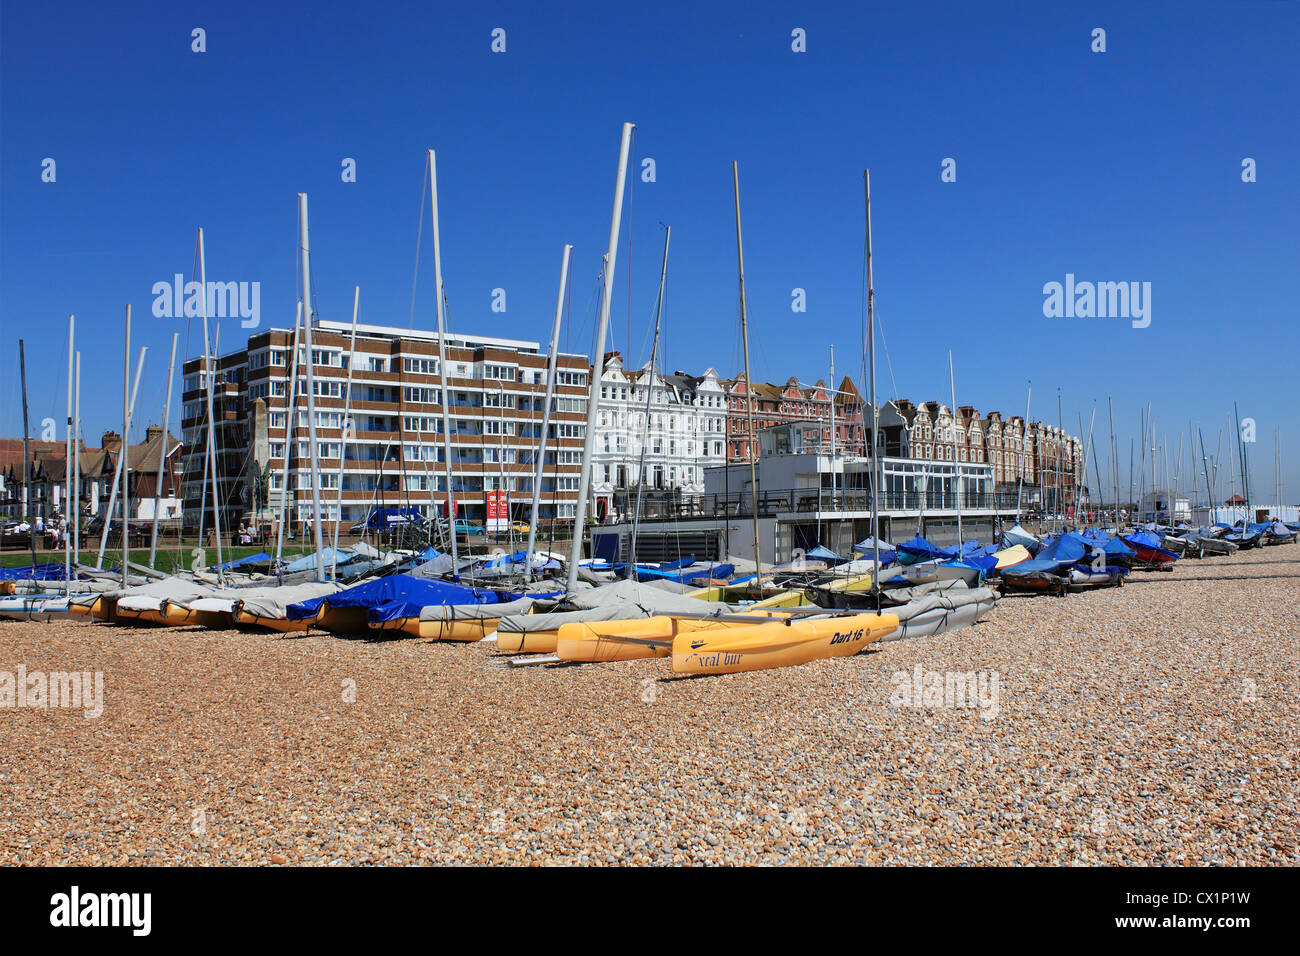 Yachts on the beach at Bexhill-on-Sea, East Sussex, England UK Stock Photo